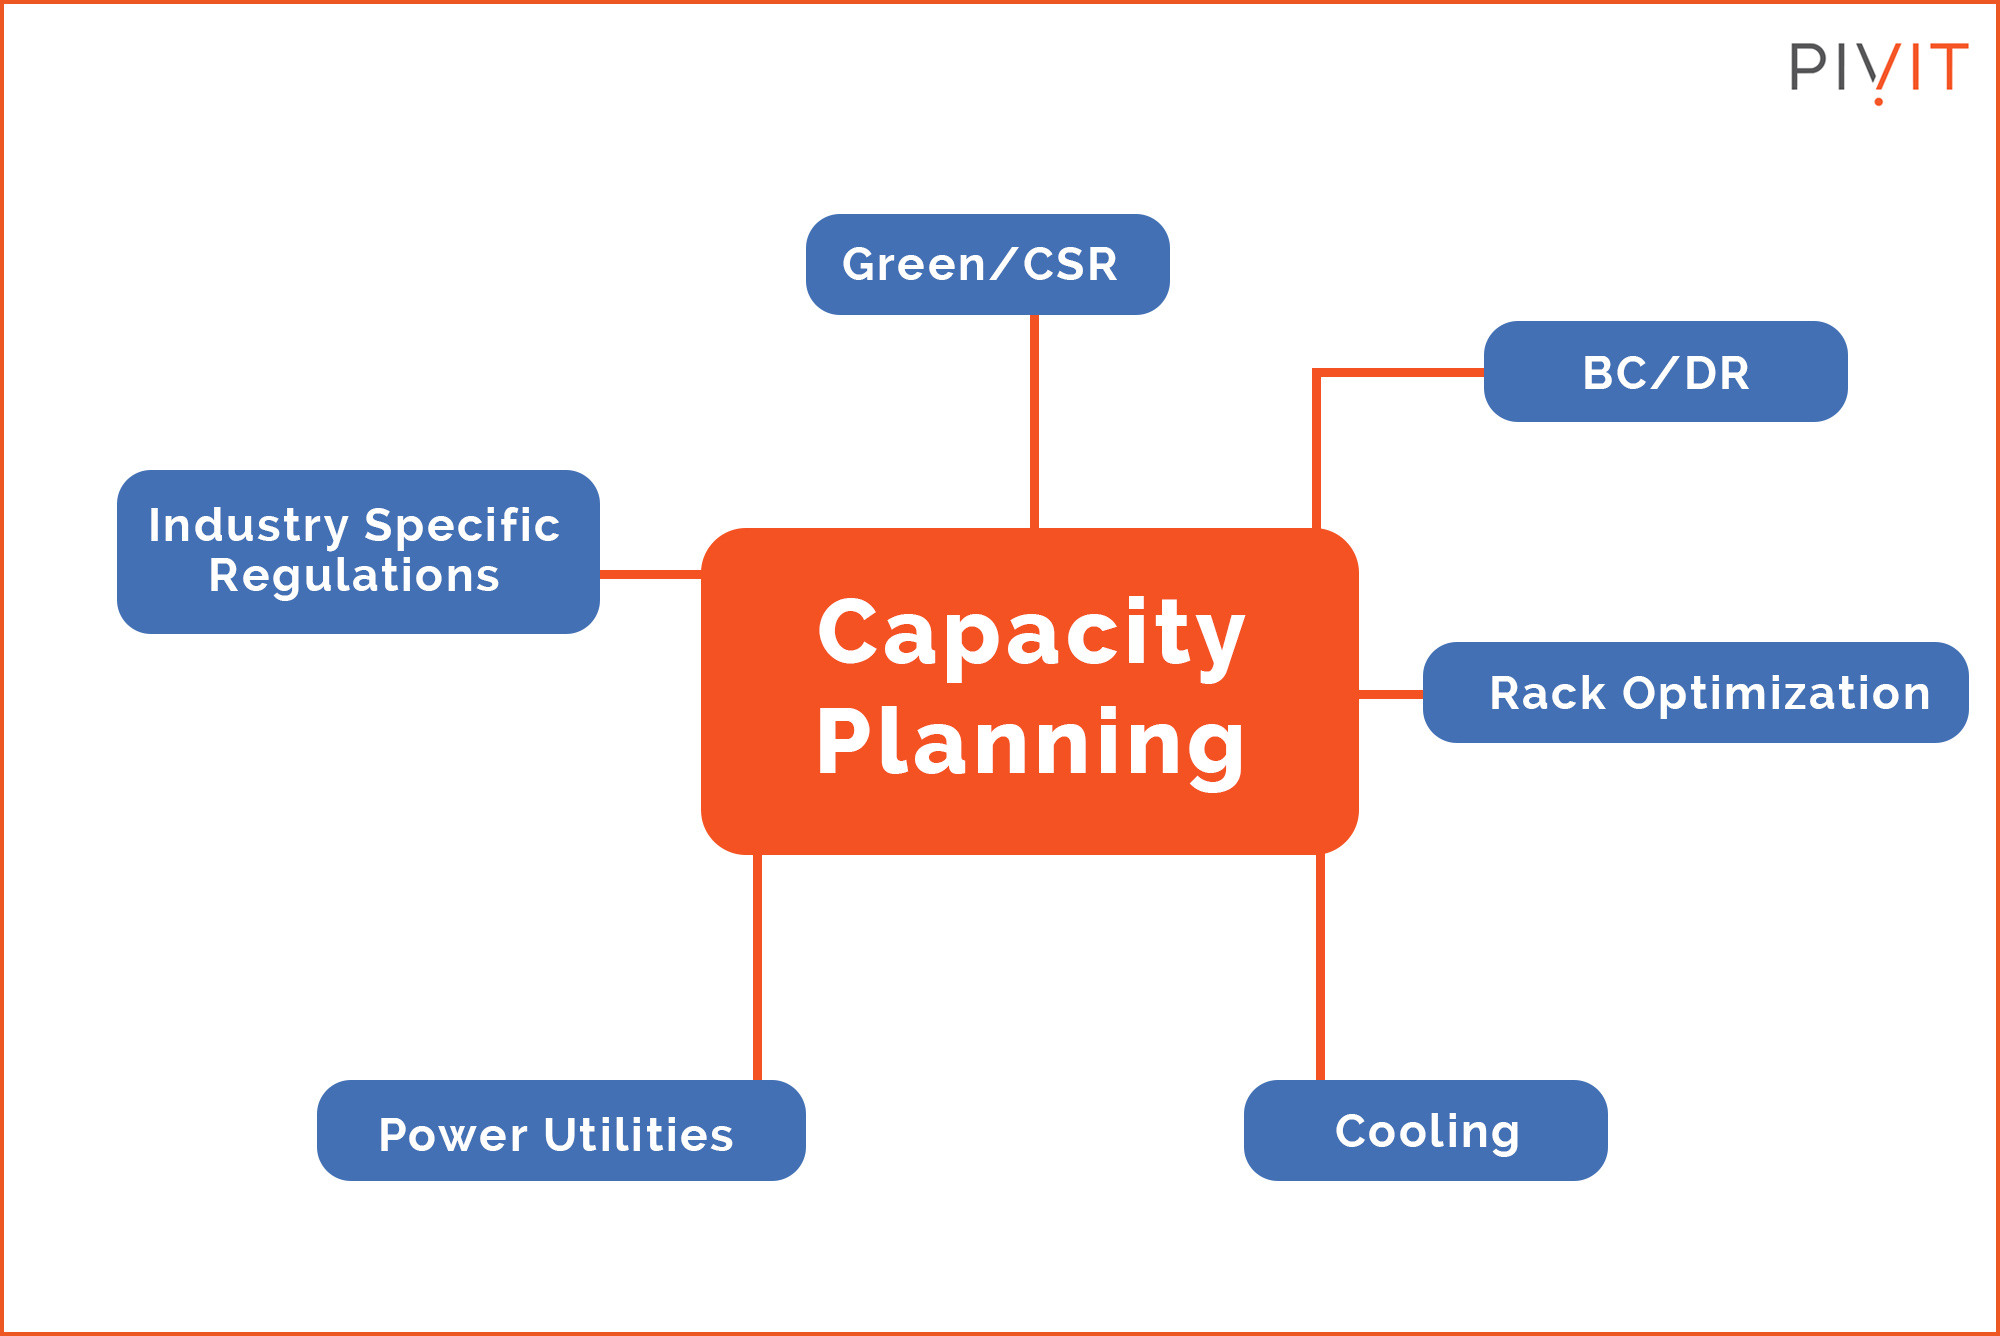 Capacity planning diagram showing industry specific regulations, power utilities, cooling, rack optimization, BC/DR, and green/CSR